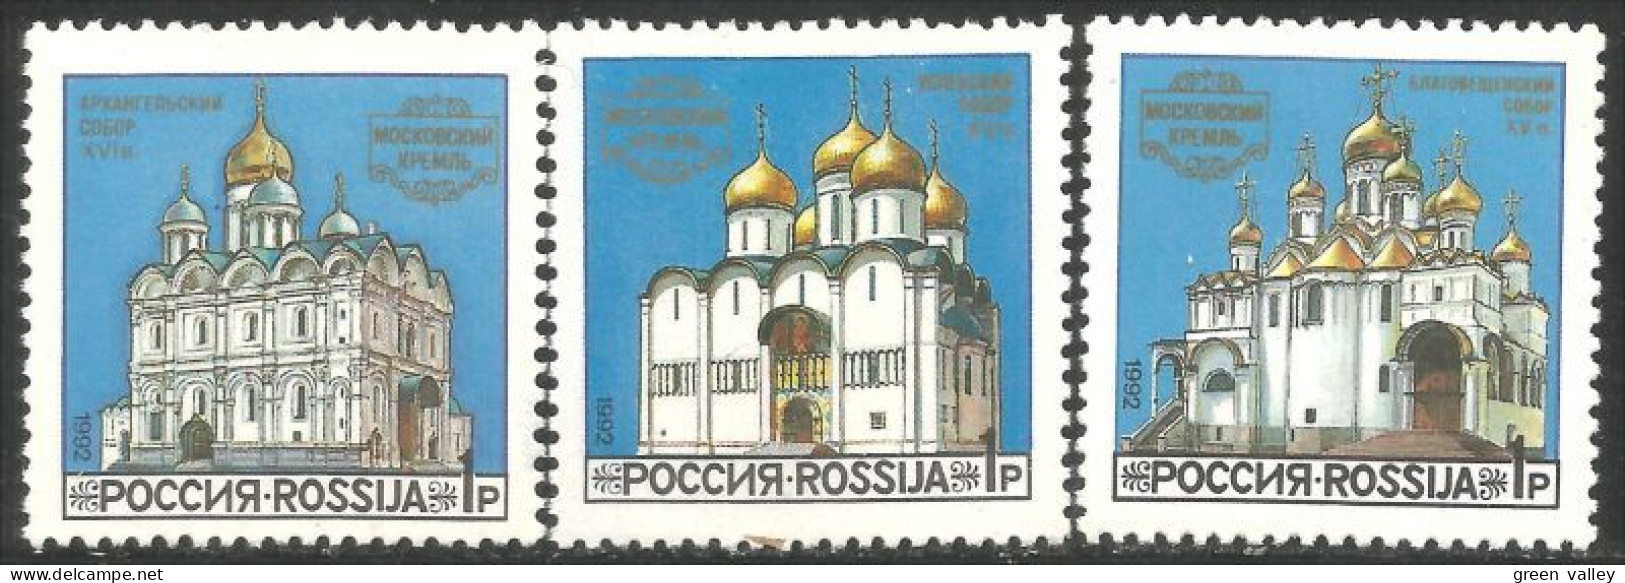 774 Russie Cathédrales Cathedrals MNH ** Neuf SC (RUS-32b) - Chiese E Cattedrali